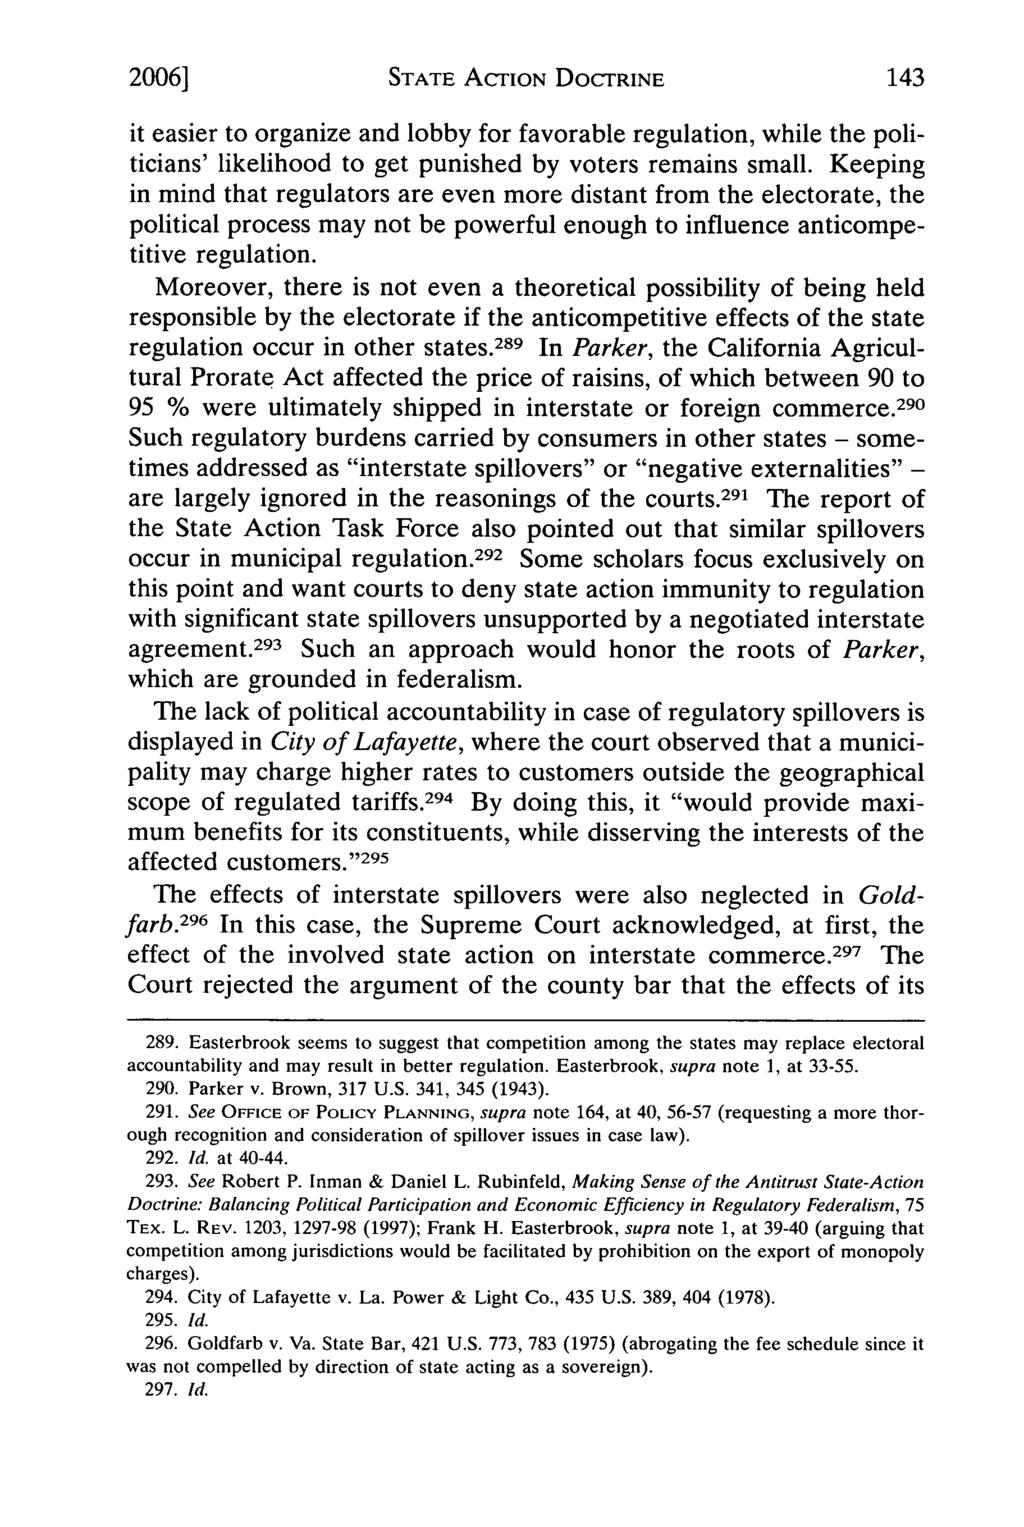 2006] STATE ACTION DOCTRINE it easier to organize and lobby for favorable regulation, while the politicians' likelihood to get punished by voters remains small.